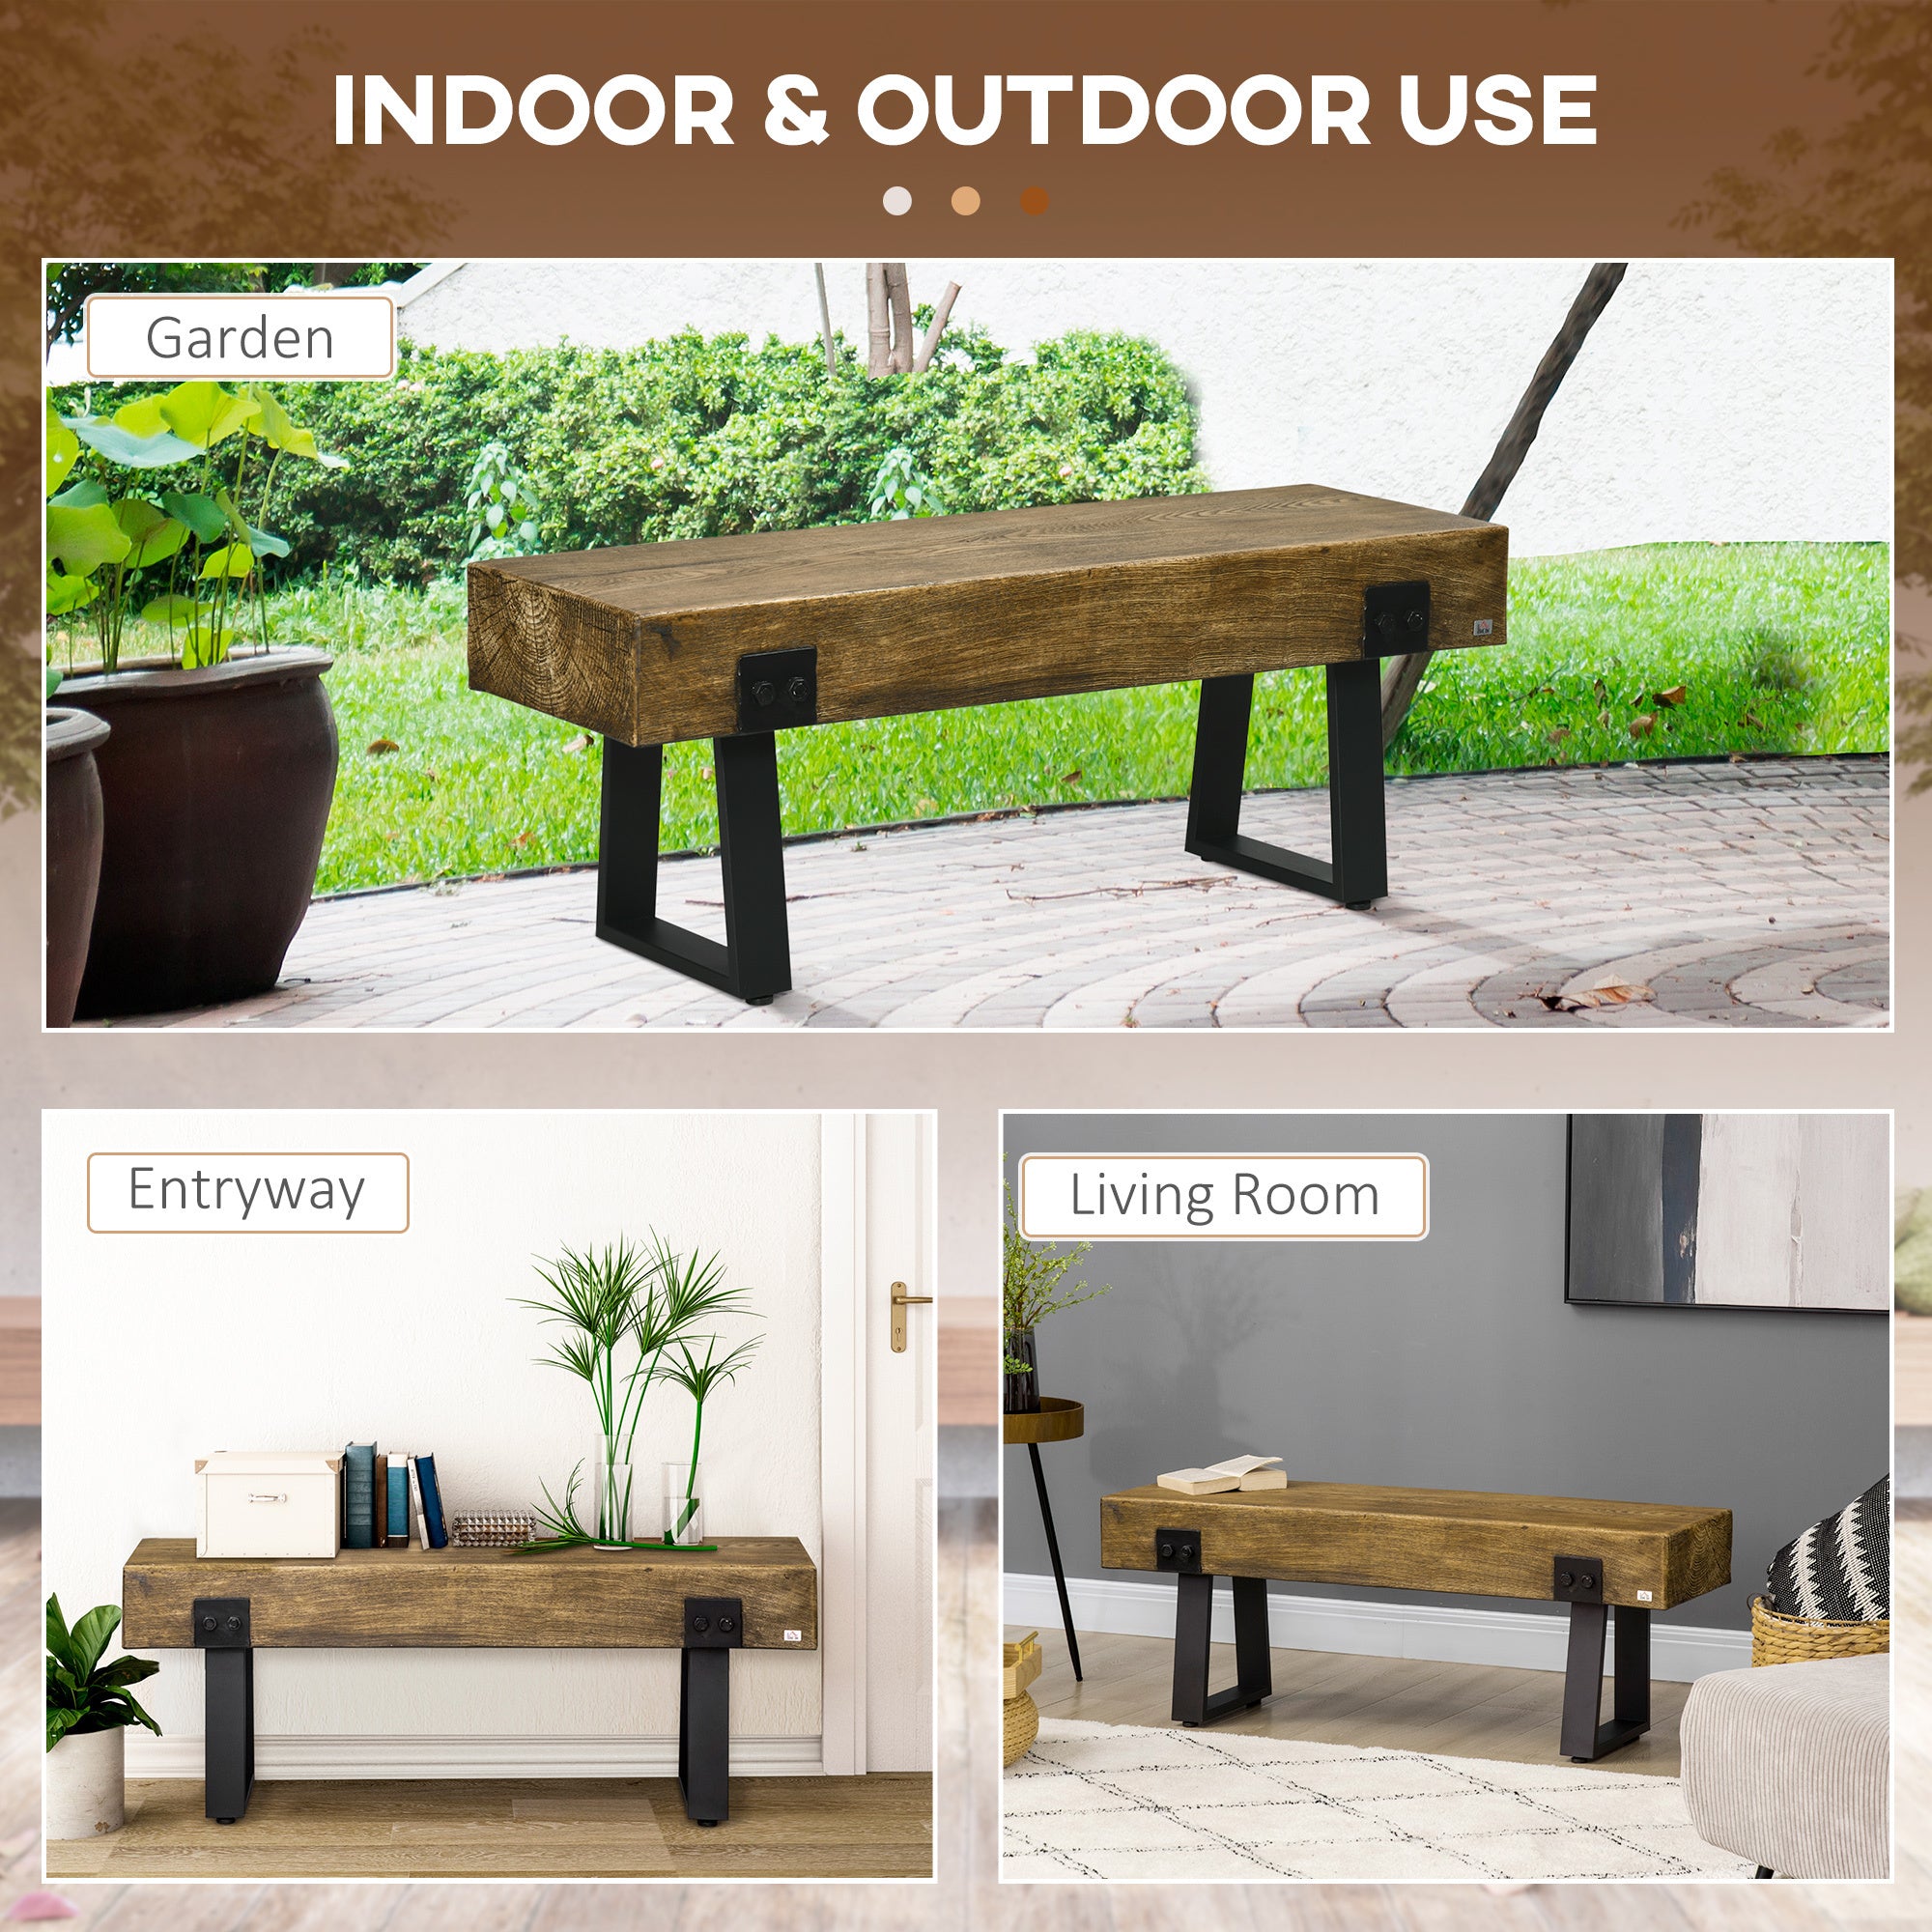 Garden Bench with Metal Legs, Rustic Wood Effect Concrete - Natural and Black